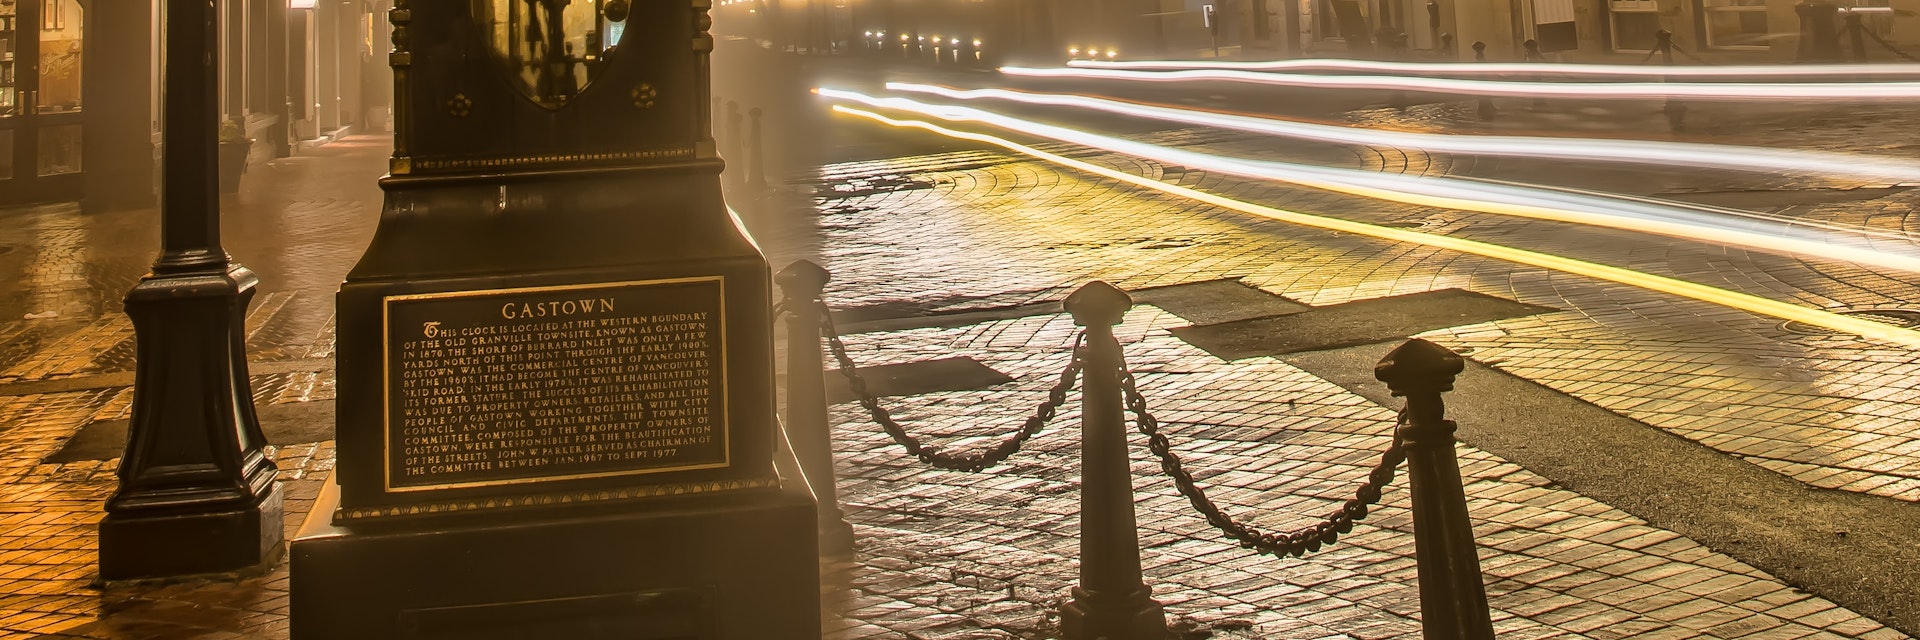 A car drove by just as  I was snapping a photo of the Gastown steam clock.  It added some nice streaks to the photo.